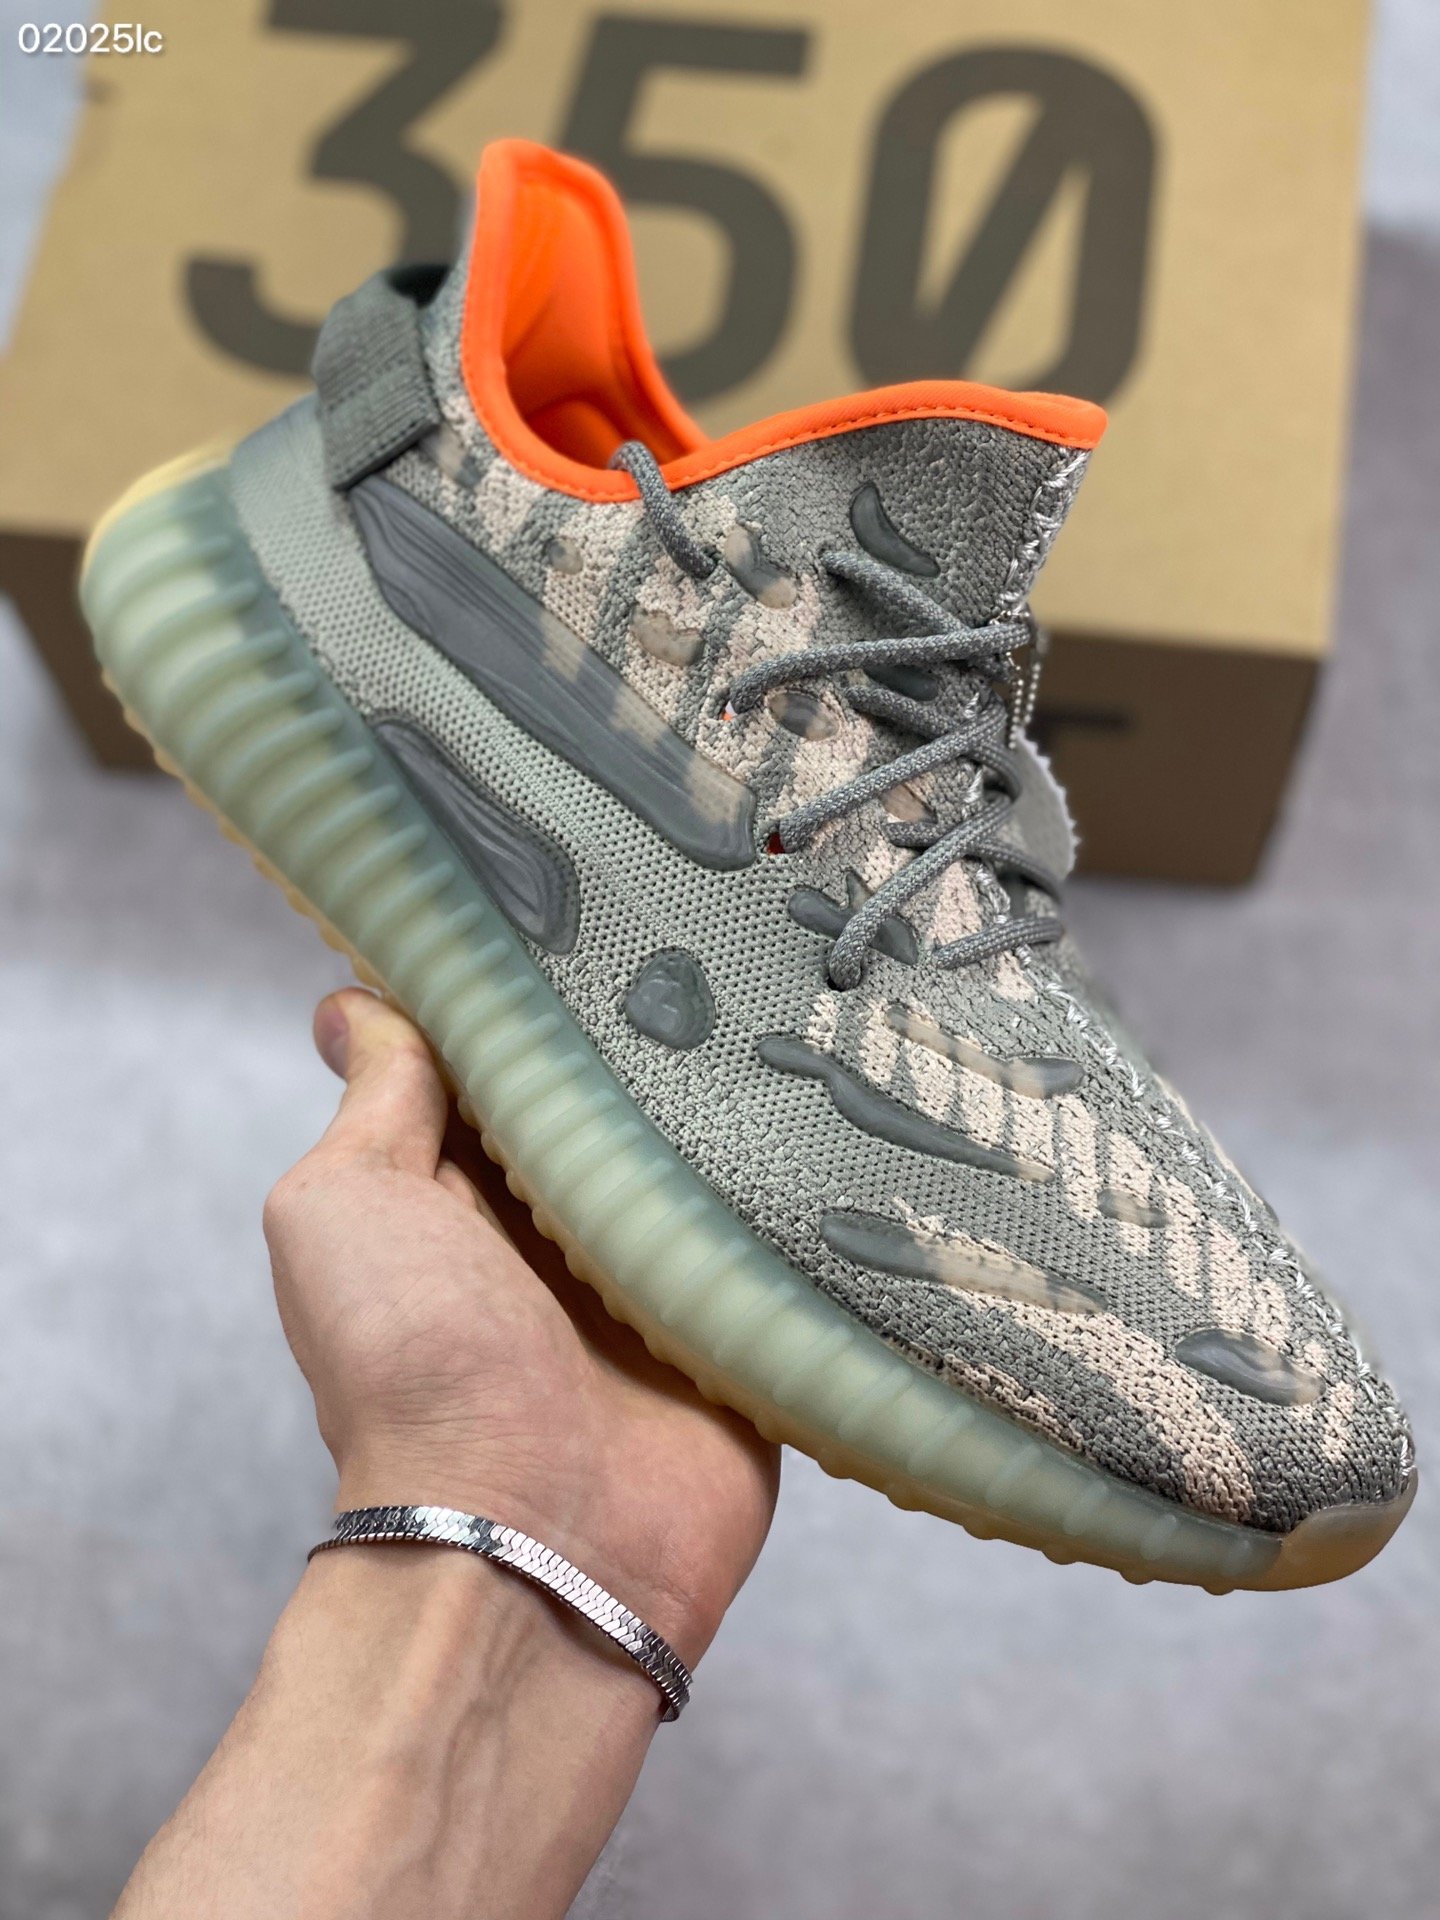 Cheap 2020 cheap Adidas yeezy Boost 350 V2 Sneakers Unisex ...